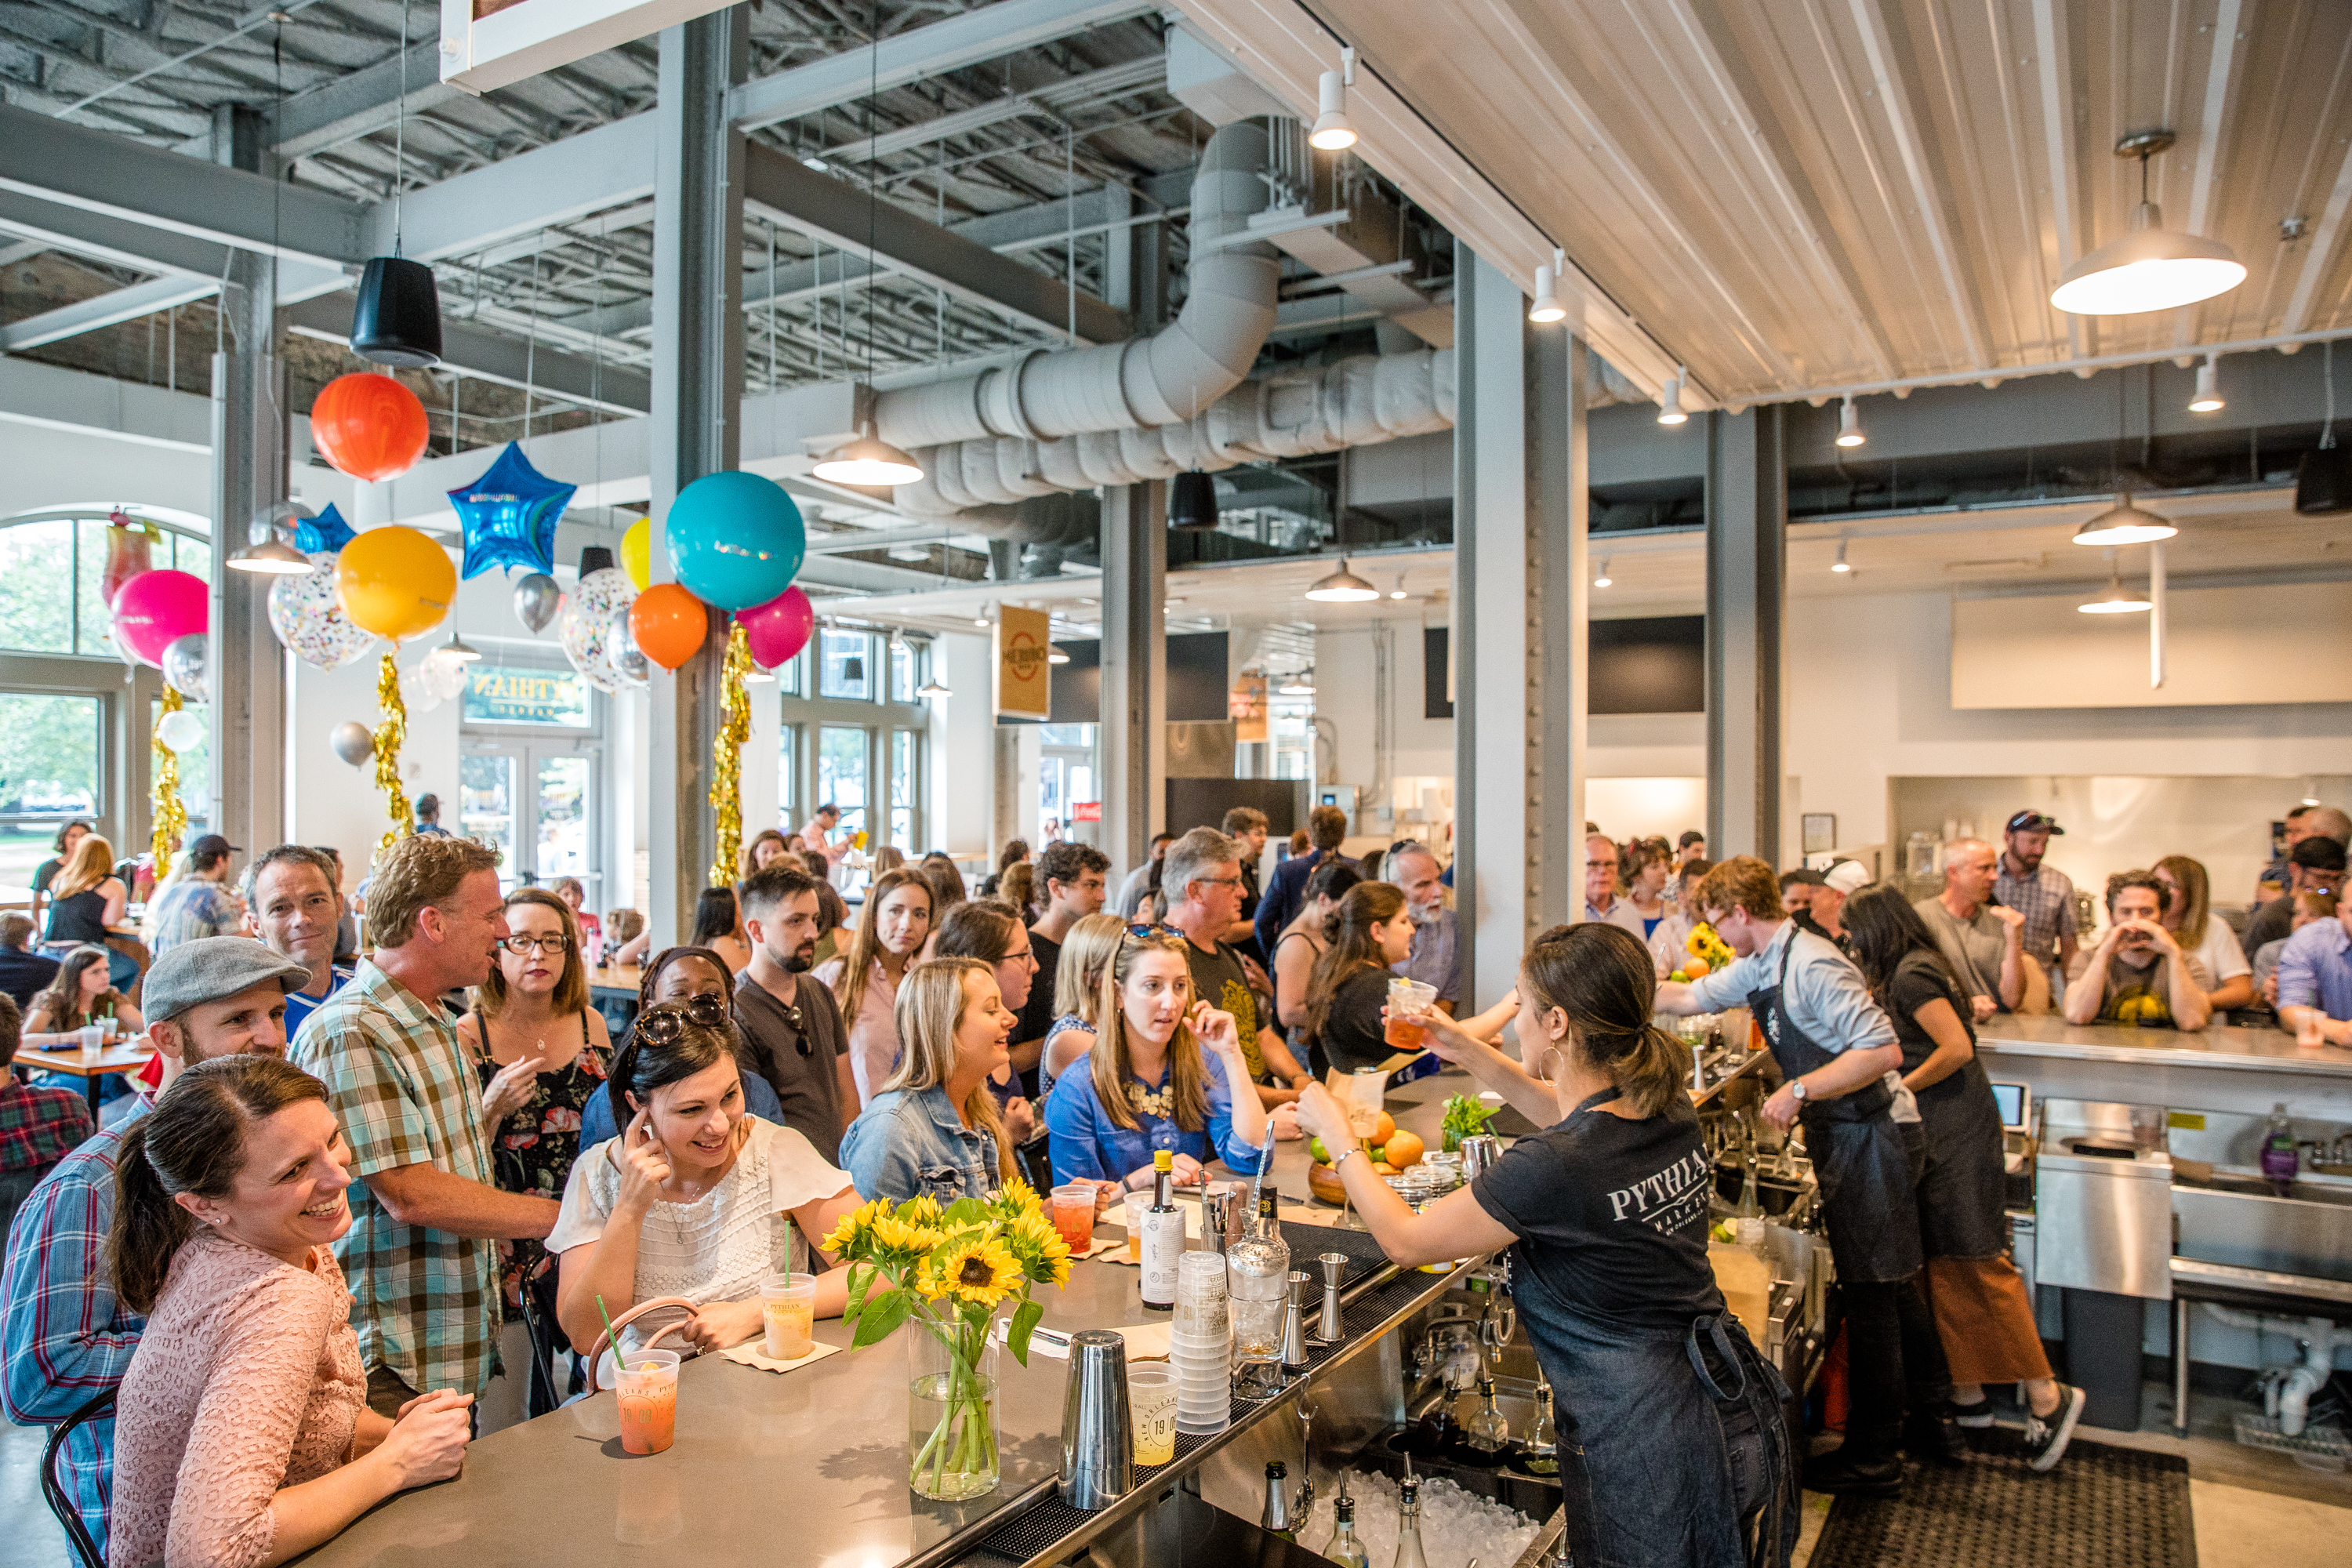 A crowd of people stand at a bar awaiting drinks in a food hall.